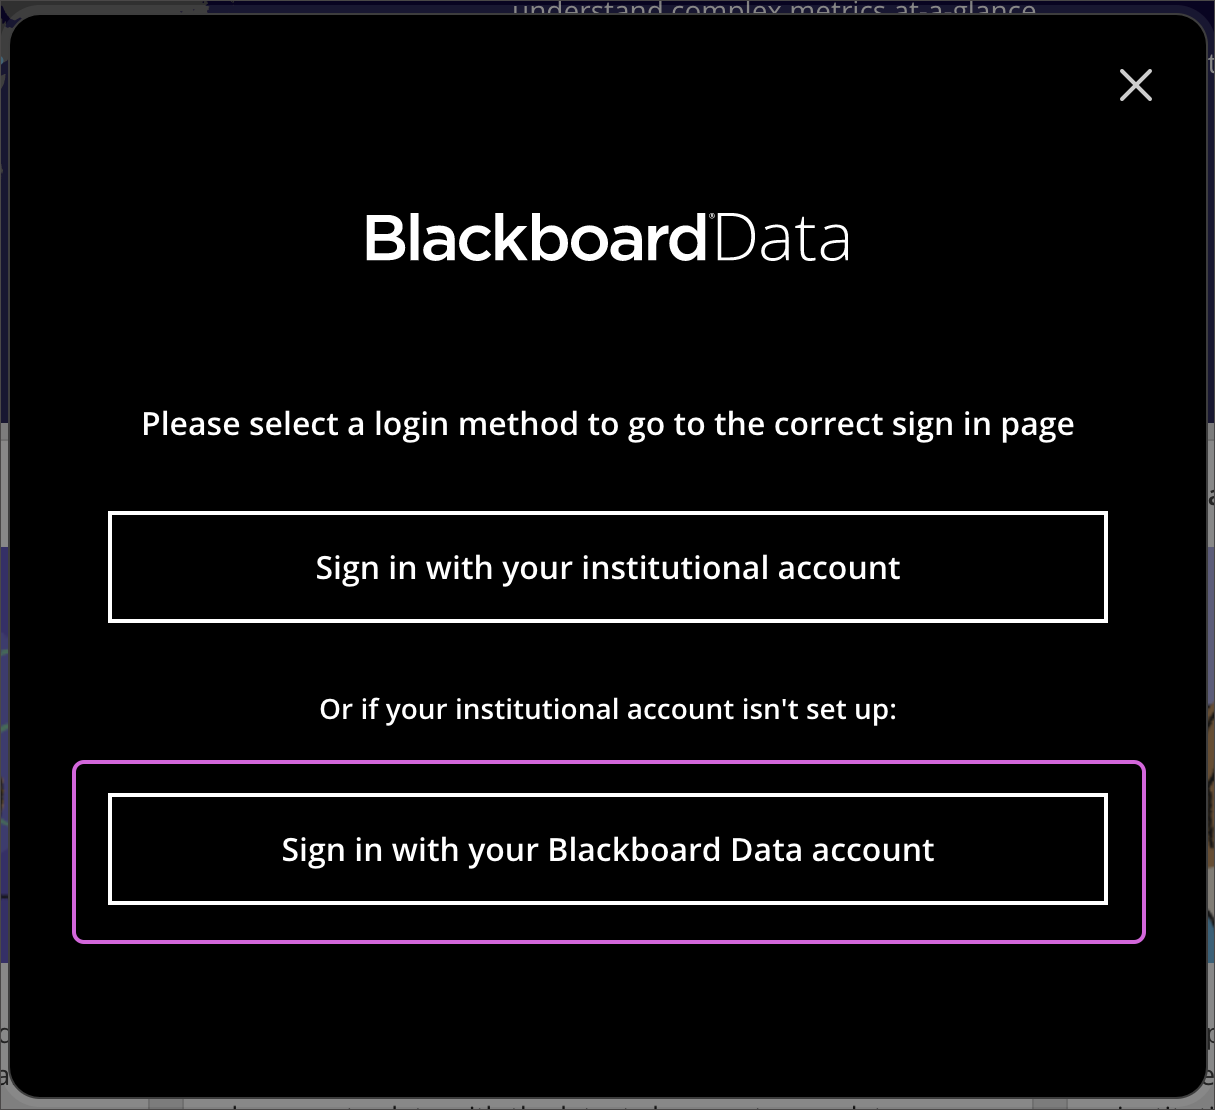 Blackboard Data Log in method screen. First option is Sign in with your institutional account and the second option is to Sign in with your Blackboard Data Account.